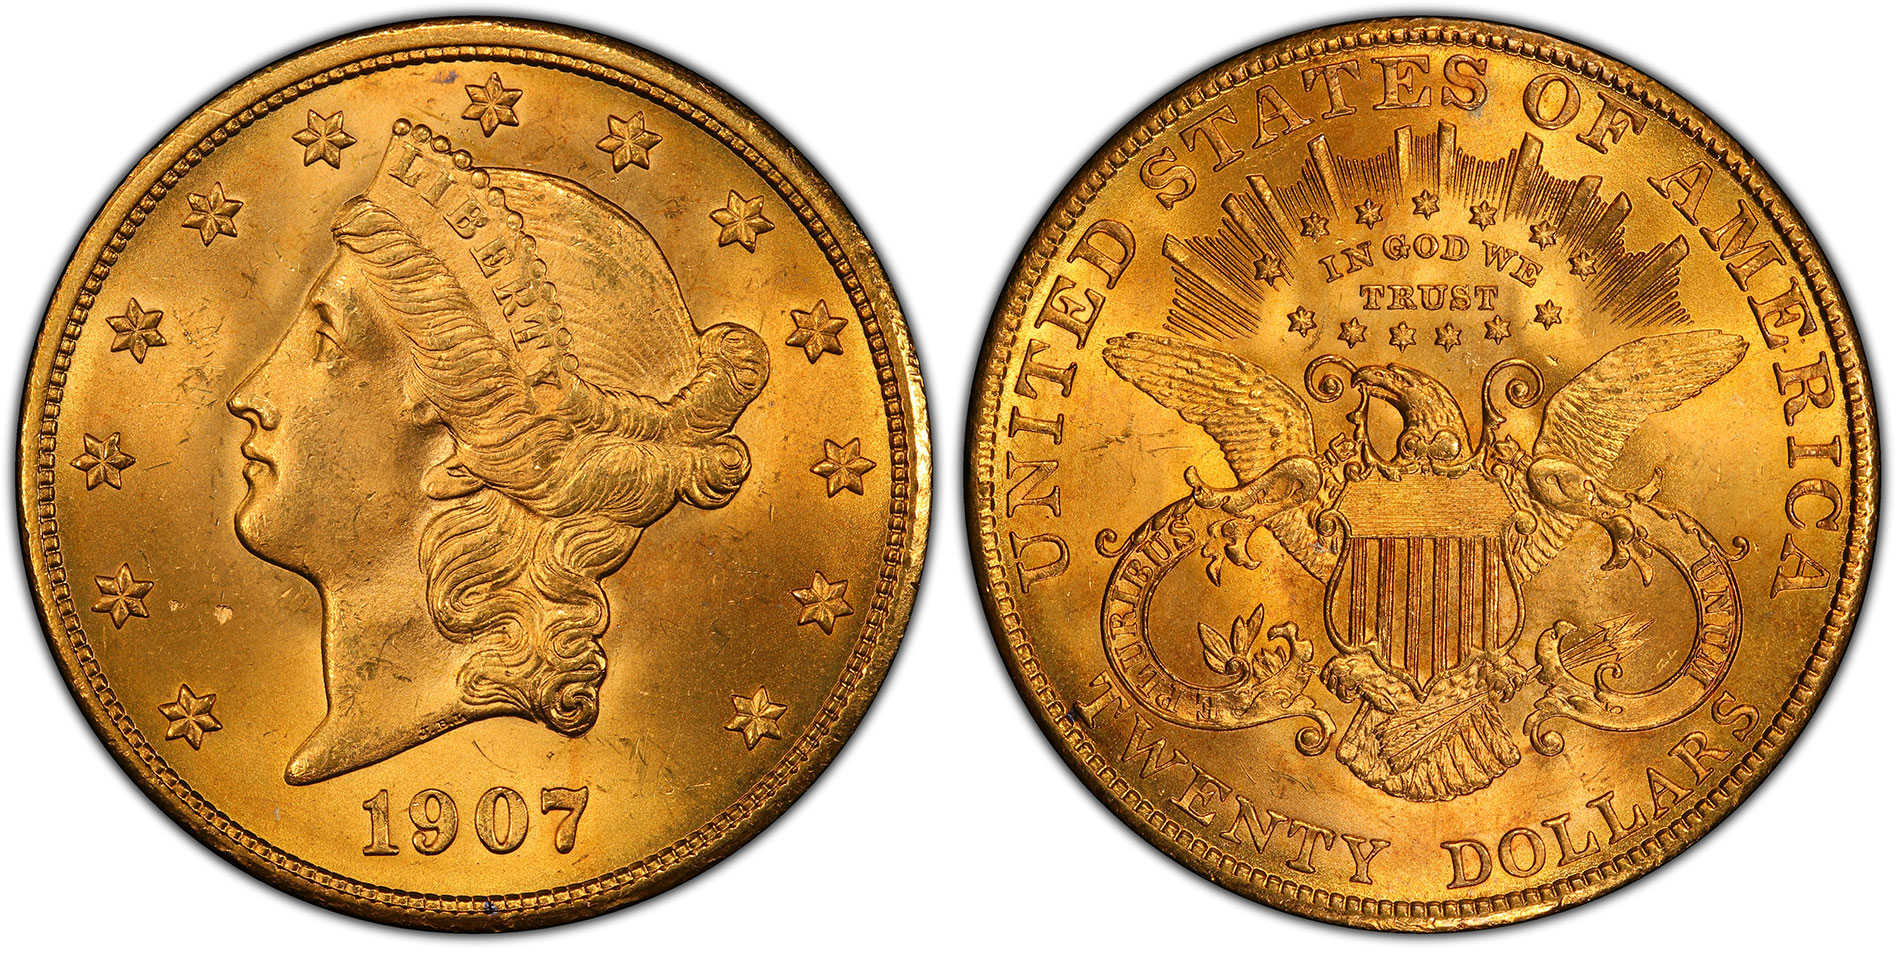 4 Gold Coin Bargains